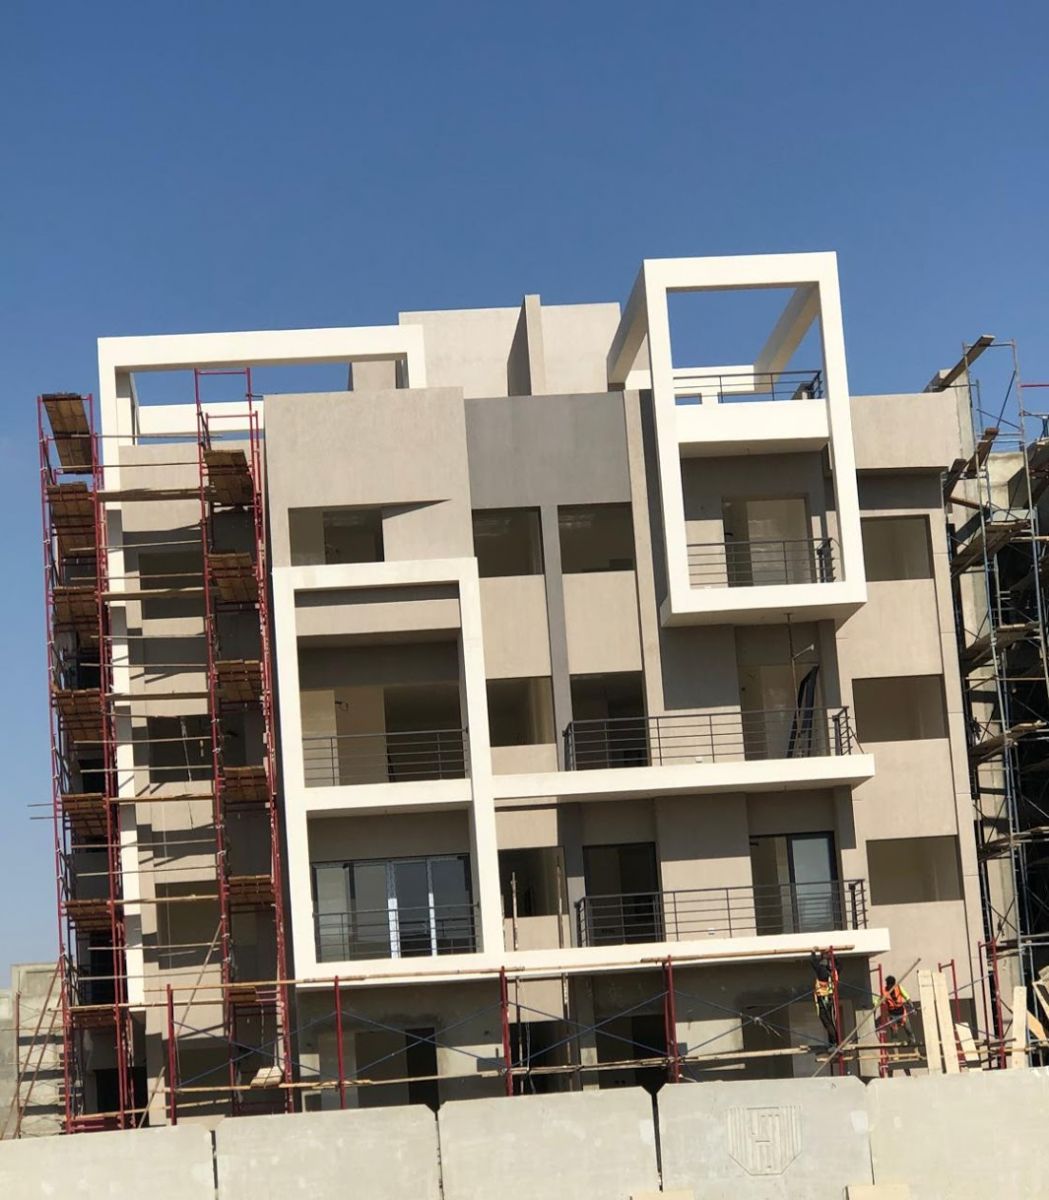 Apartments-in-Fifth-Square-2020-06-06